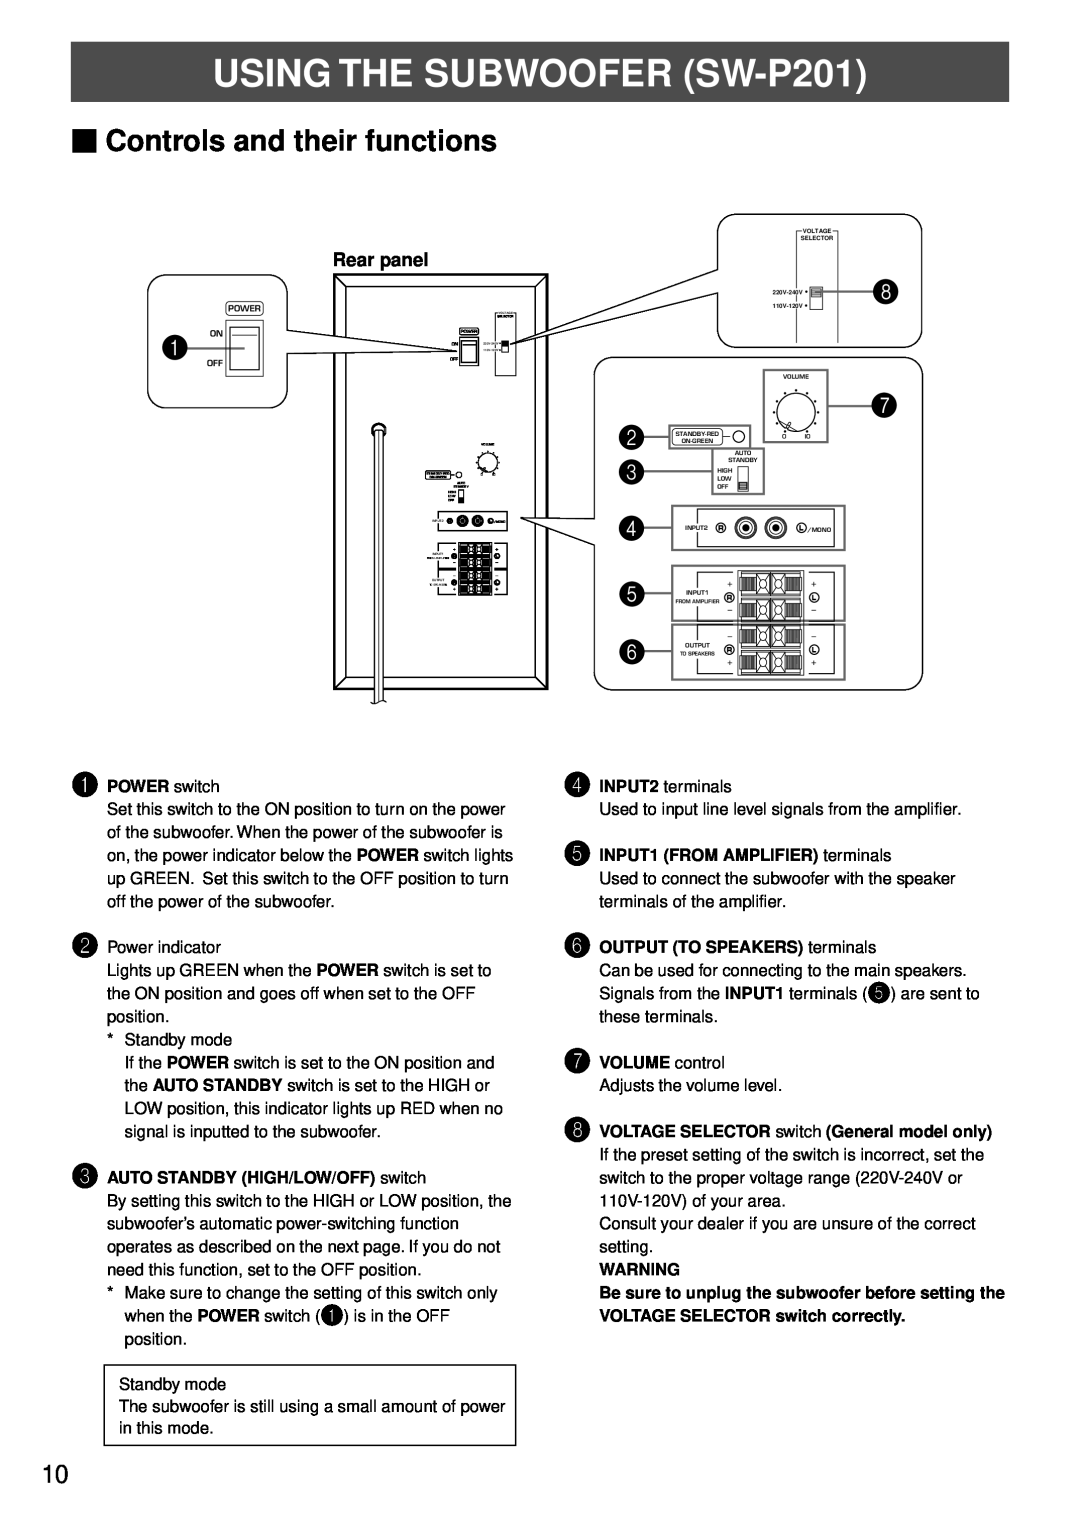 Yamaha NS-P220 owner manual USING THE SUBWOOFER SW-P201, Controls and their functions, Rear panel, 1POWER switch 